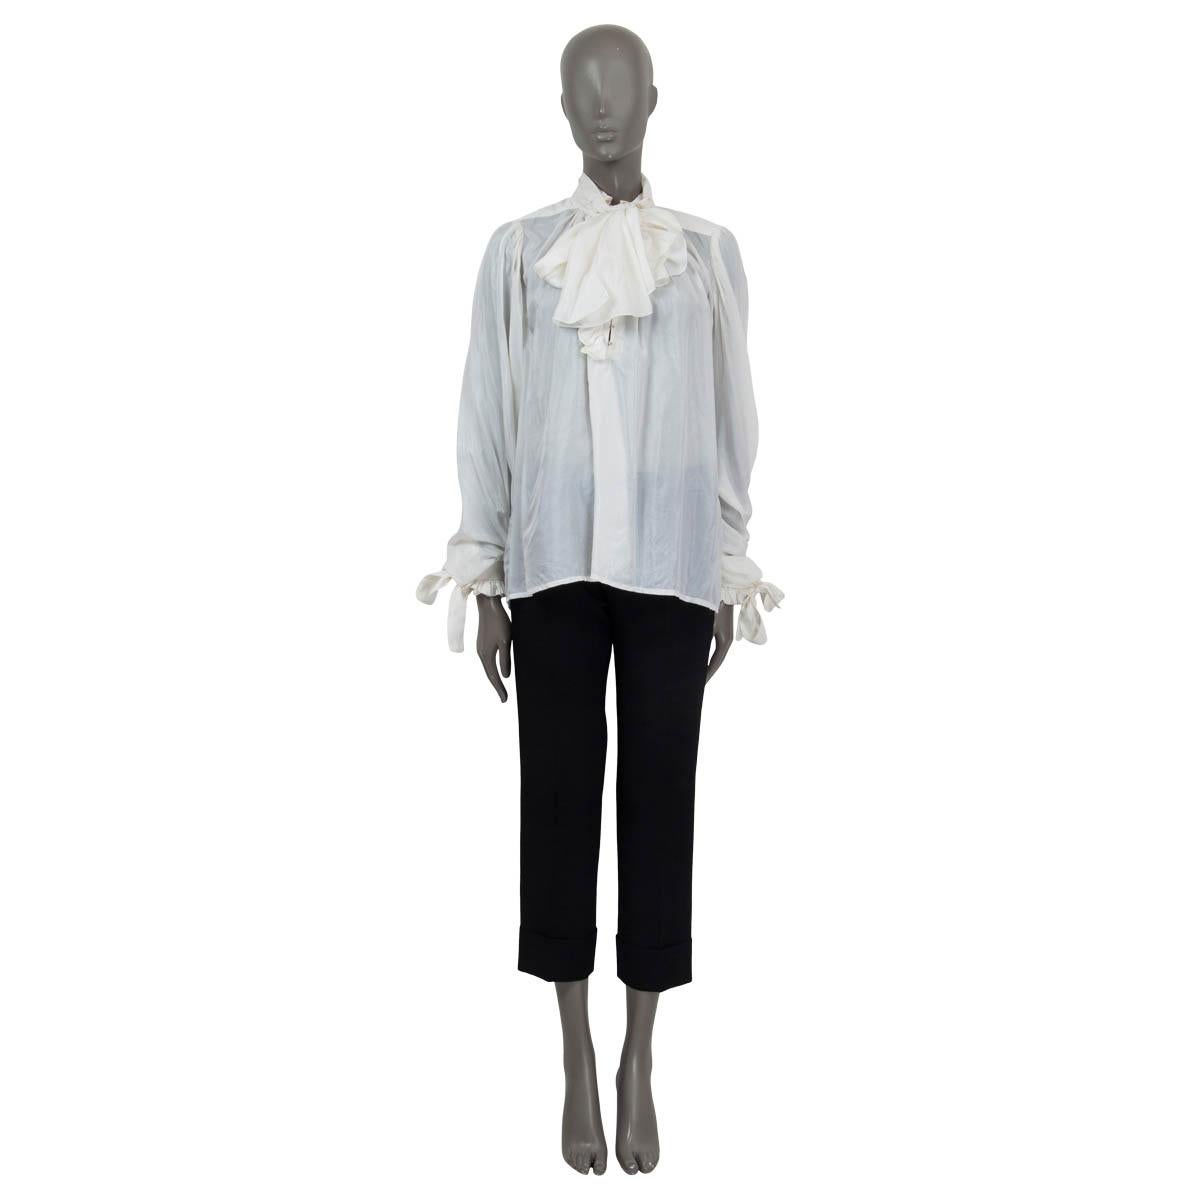 100% authentic Louis Vuitton semi sheer ruffled long sleeve blouse in off-white silk (100%). Features a pussy bow at the neck and ruffled, buttoned cuffs. Opens with hooks on the front. Unlined. Has been worn and is in excellent